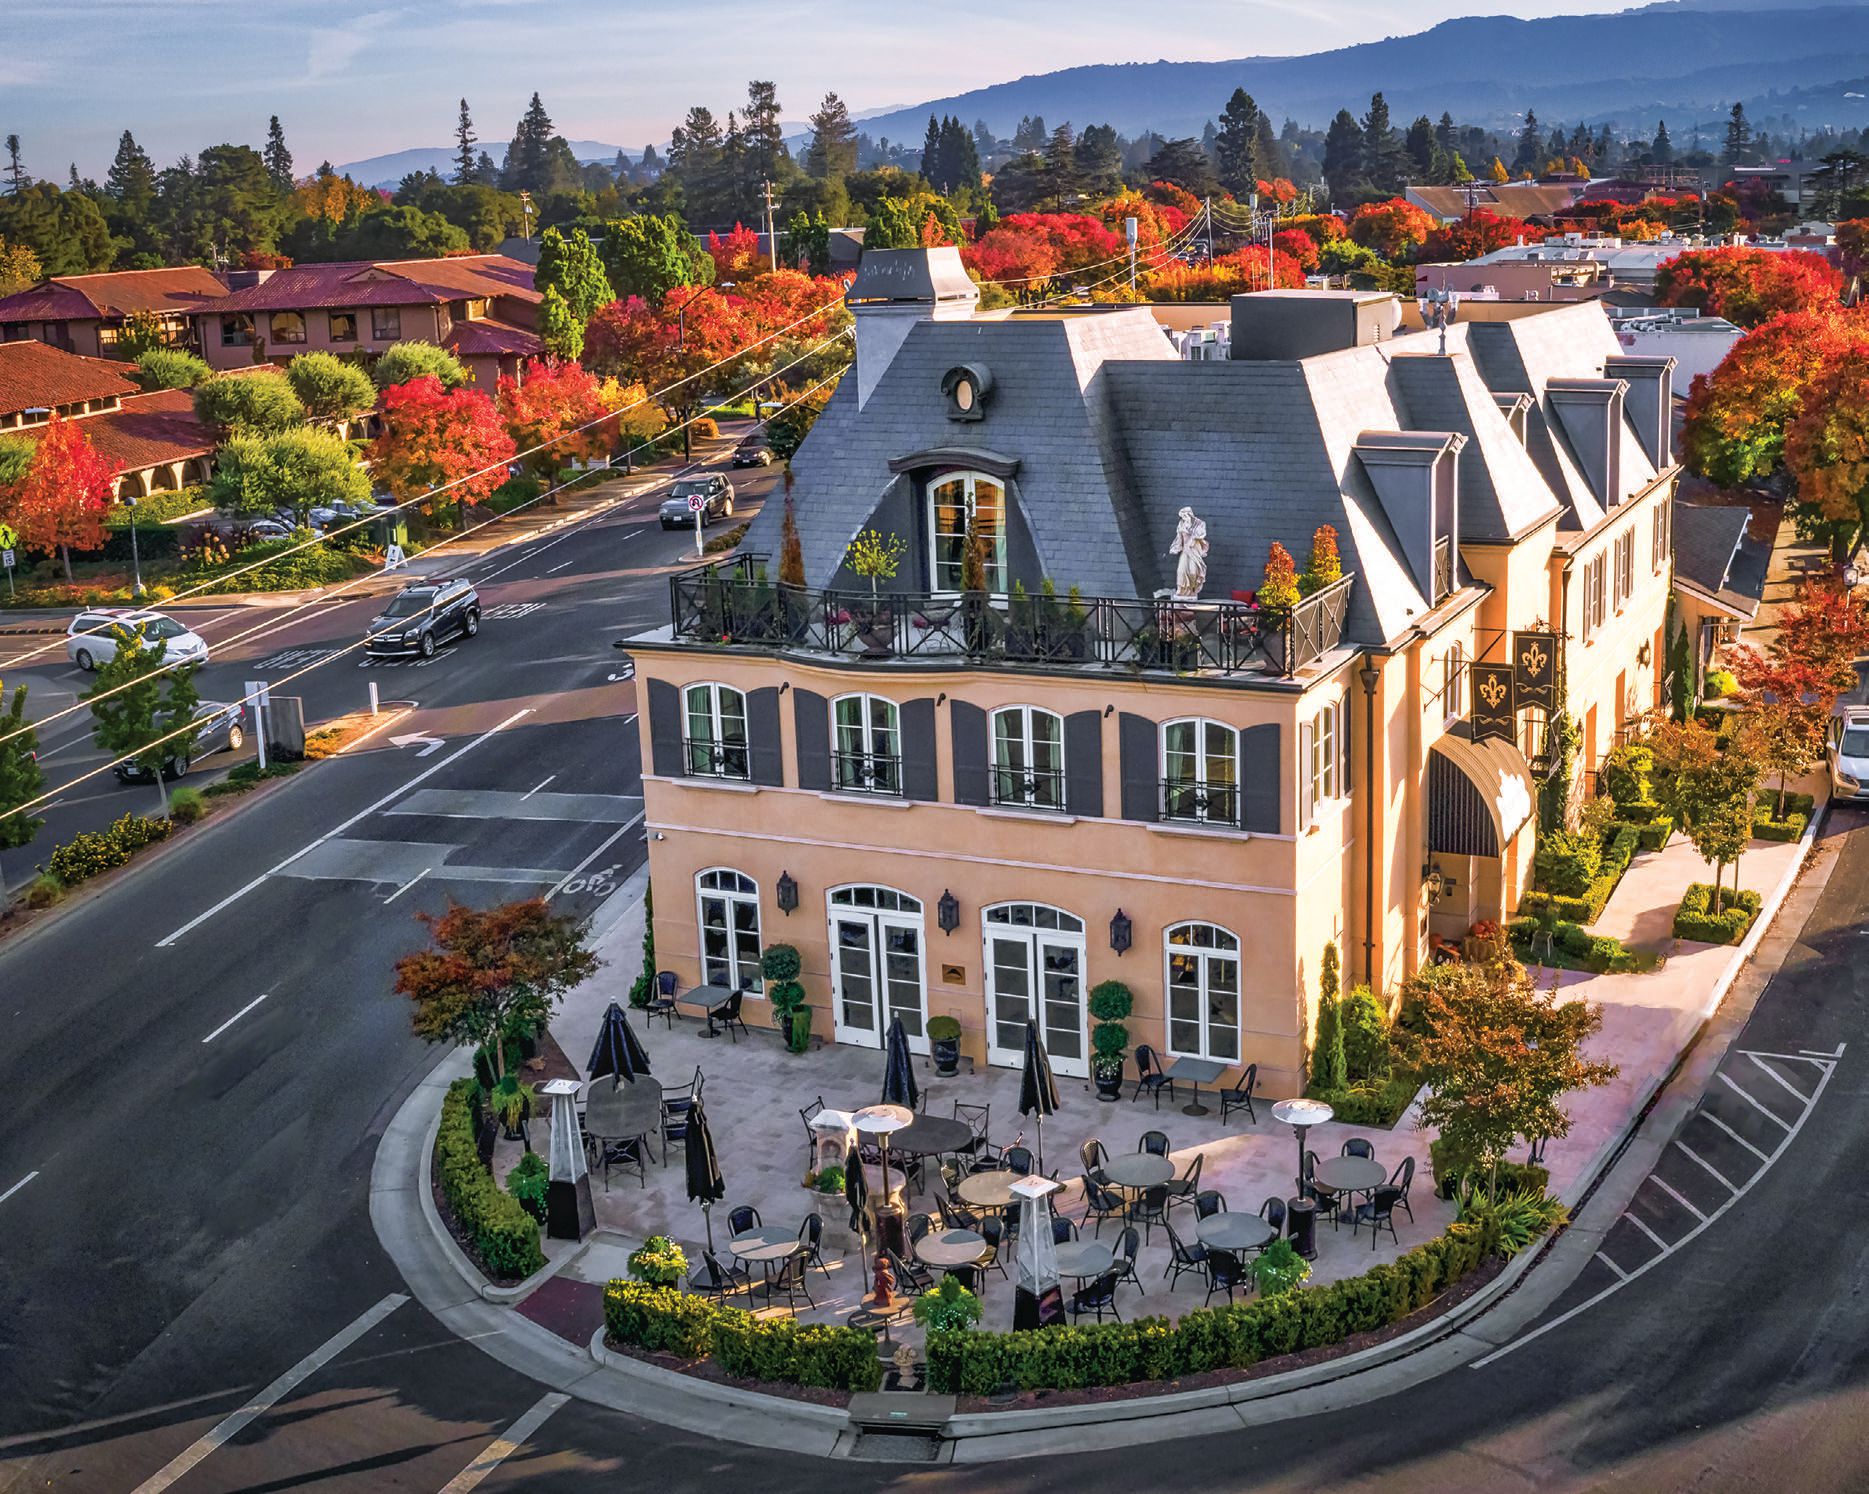 The Parisian-style hotel known as Enchanté anchors the downtown. PHOTO COURTESY OF LOS ALTOS CHAMBER OF COMMERCE